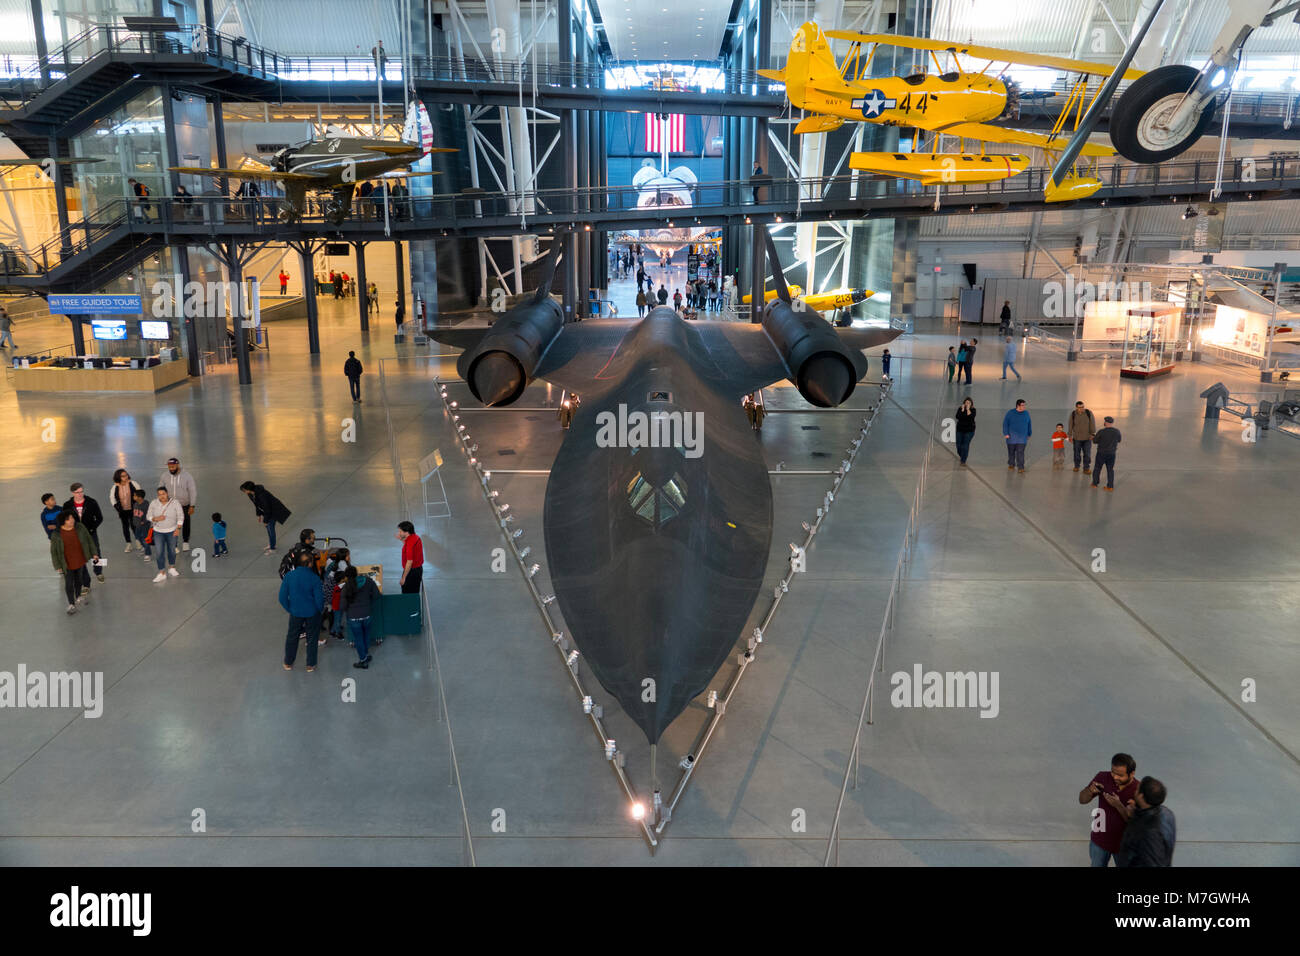 Steven F Udvar Hazy Center  Smithsonian Air and Space museum at Dulles Airport Chantilly Virginia interior Stock Photo